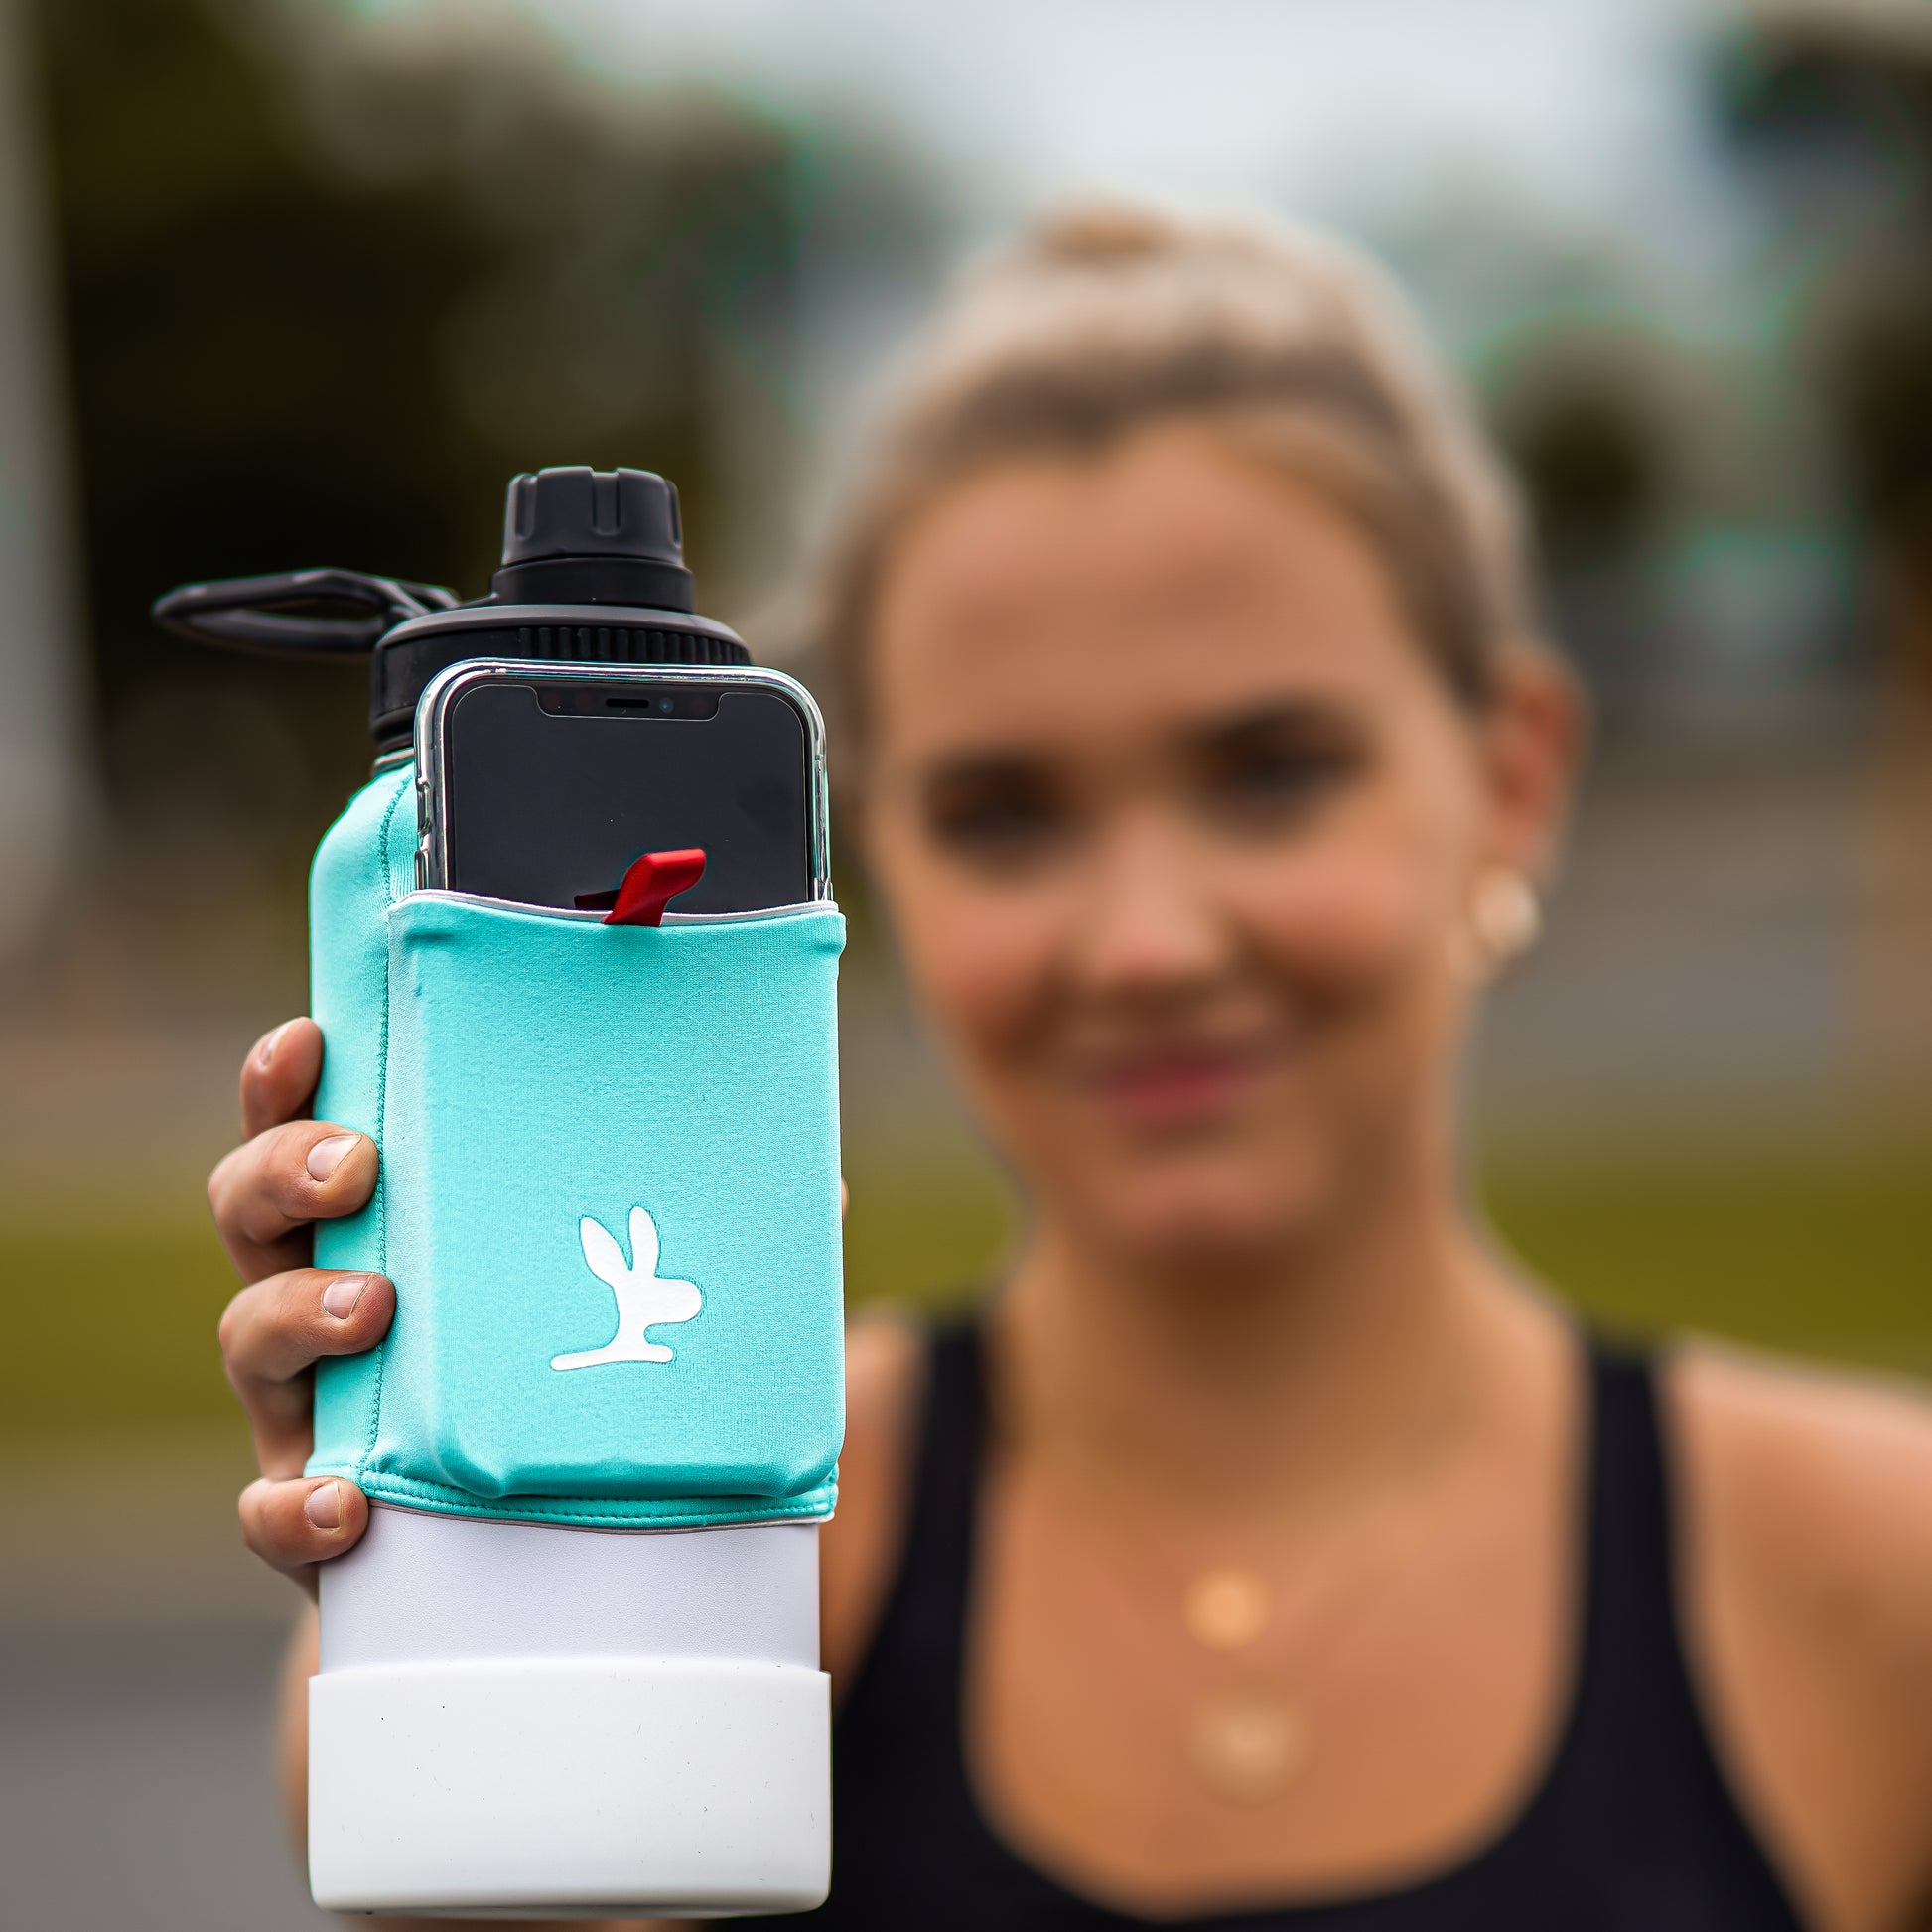 A girl holding a water bottle with an aqua colored phone holder 